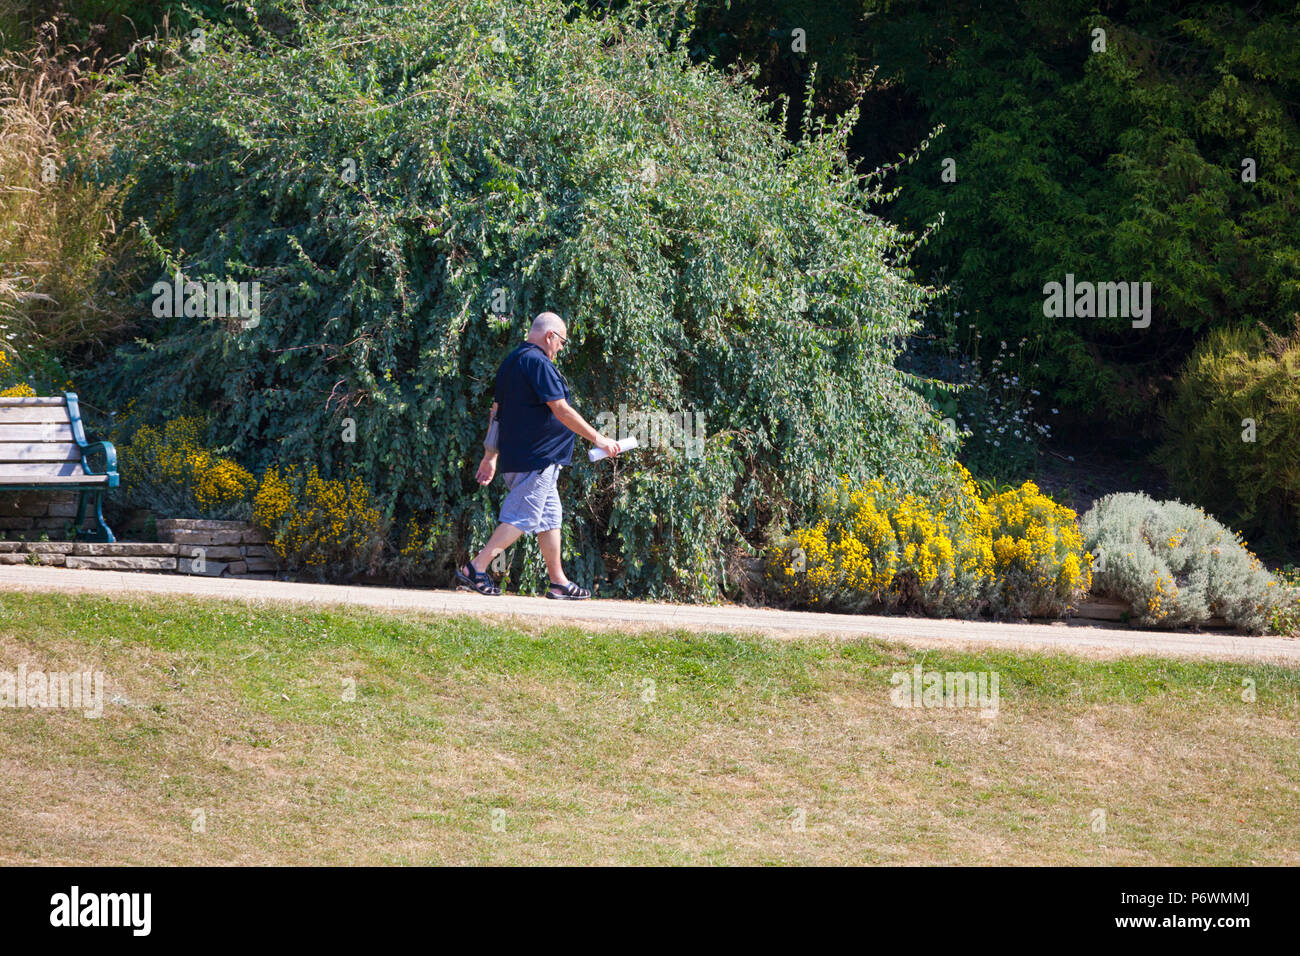 Hastings, East Sussex, UK. 3rd Jul, 2018. UK Weather: Hot and sunny start to the day in Hastings with lots of people walking in Alexandra park, landscaped by renowned gardener Robert Marnock in 1878. Covering 109 acres it is a grade 2 designated site. Temperatures are expected to exceed 21°C. A man walks down a gentle slope on a park path carrying a newspaper in one hand swinging his arm. Photo Credit: Paul Lawrenson / Alamy Live News Stock Photo